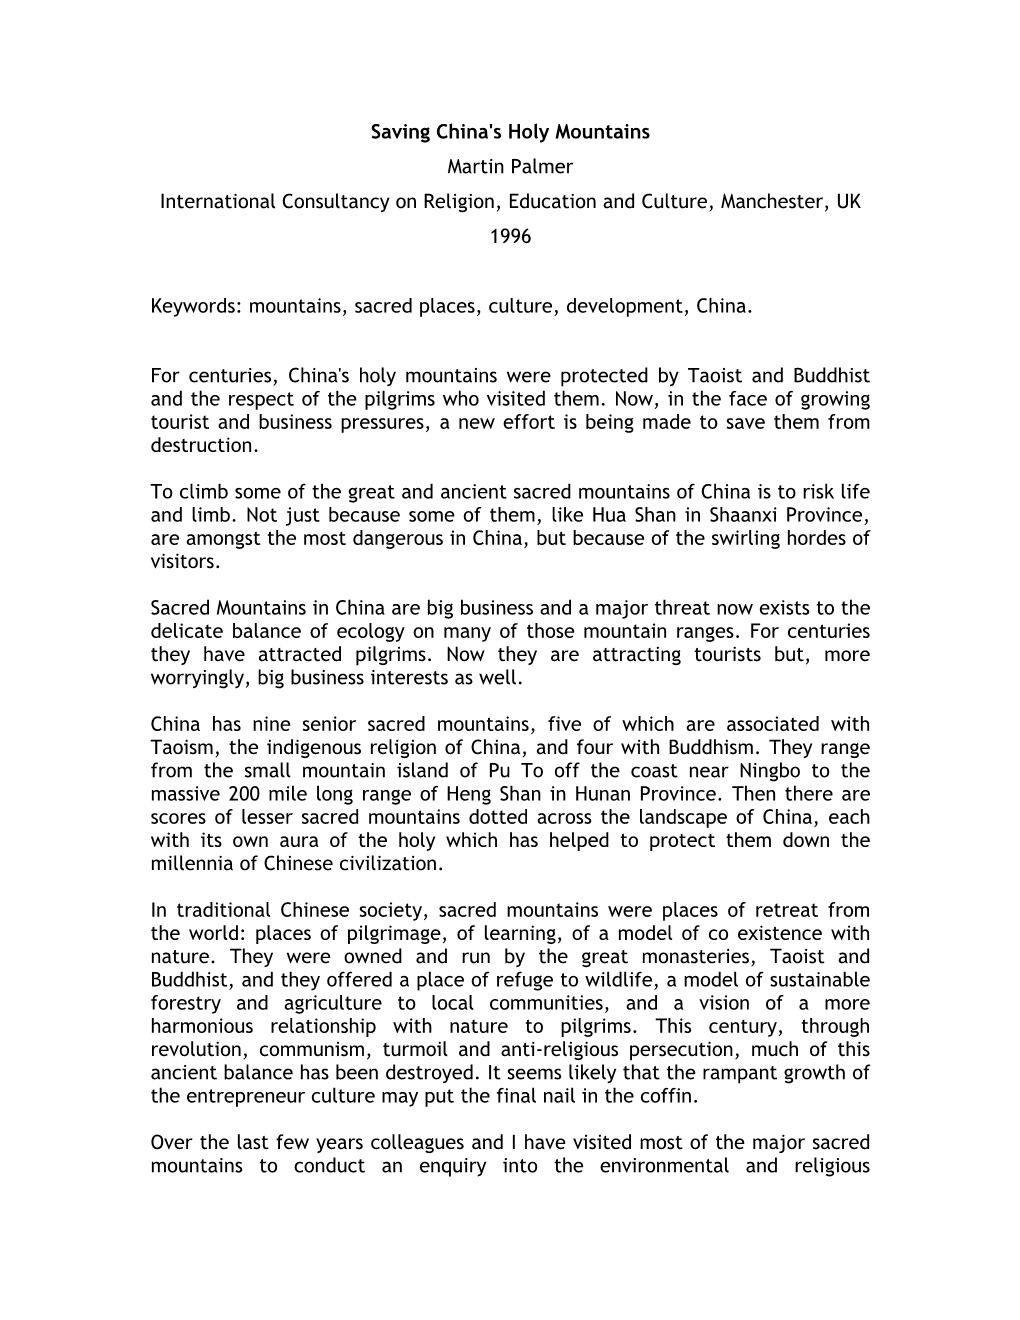 Saving China's Holy Mountains Martin Palmer International Consultancy on Religion, Education and Culture, Manchester, UK 1996